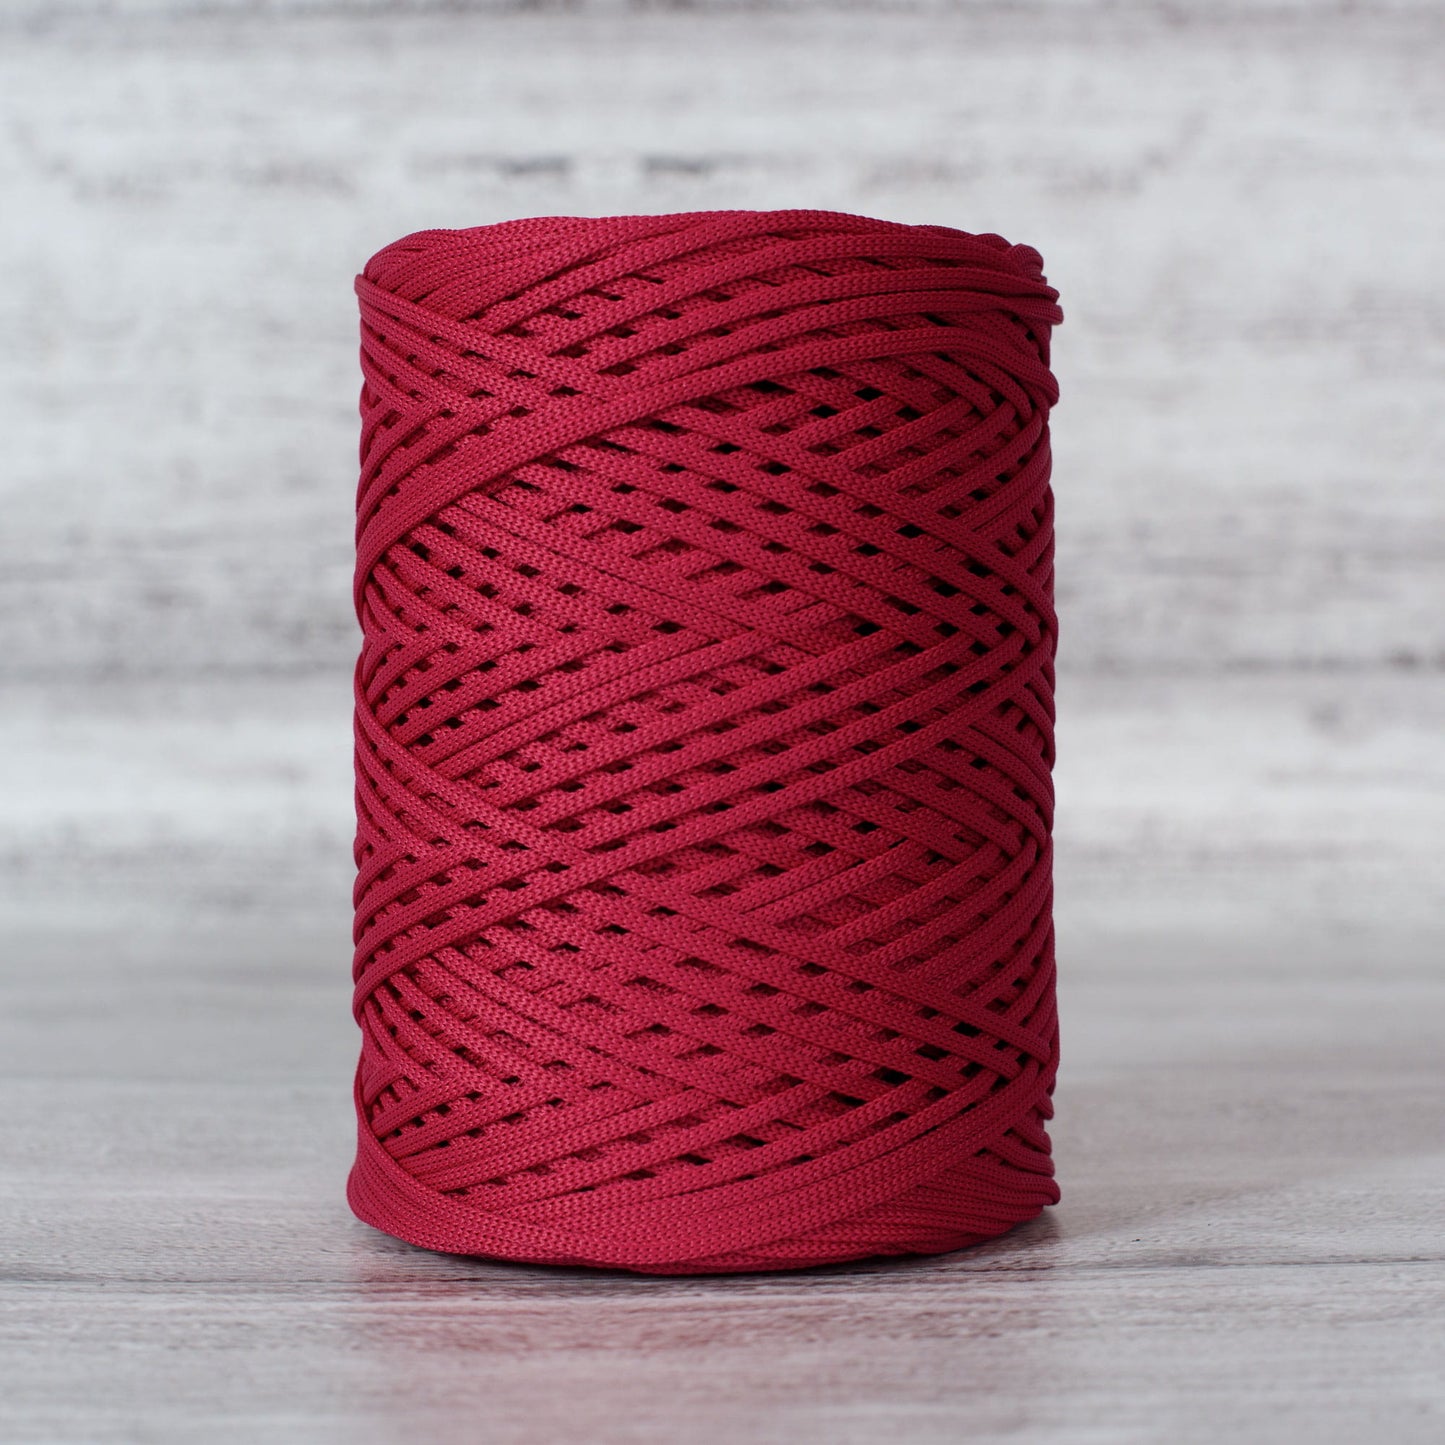 Raspberry red 2mm polyester cord